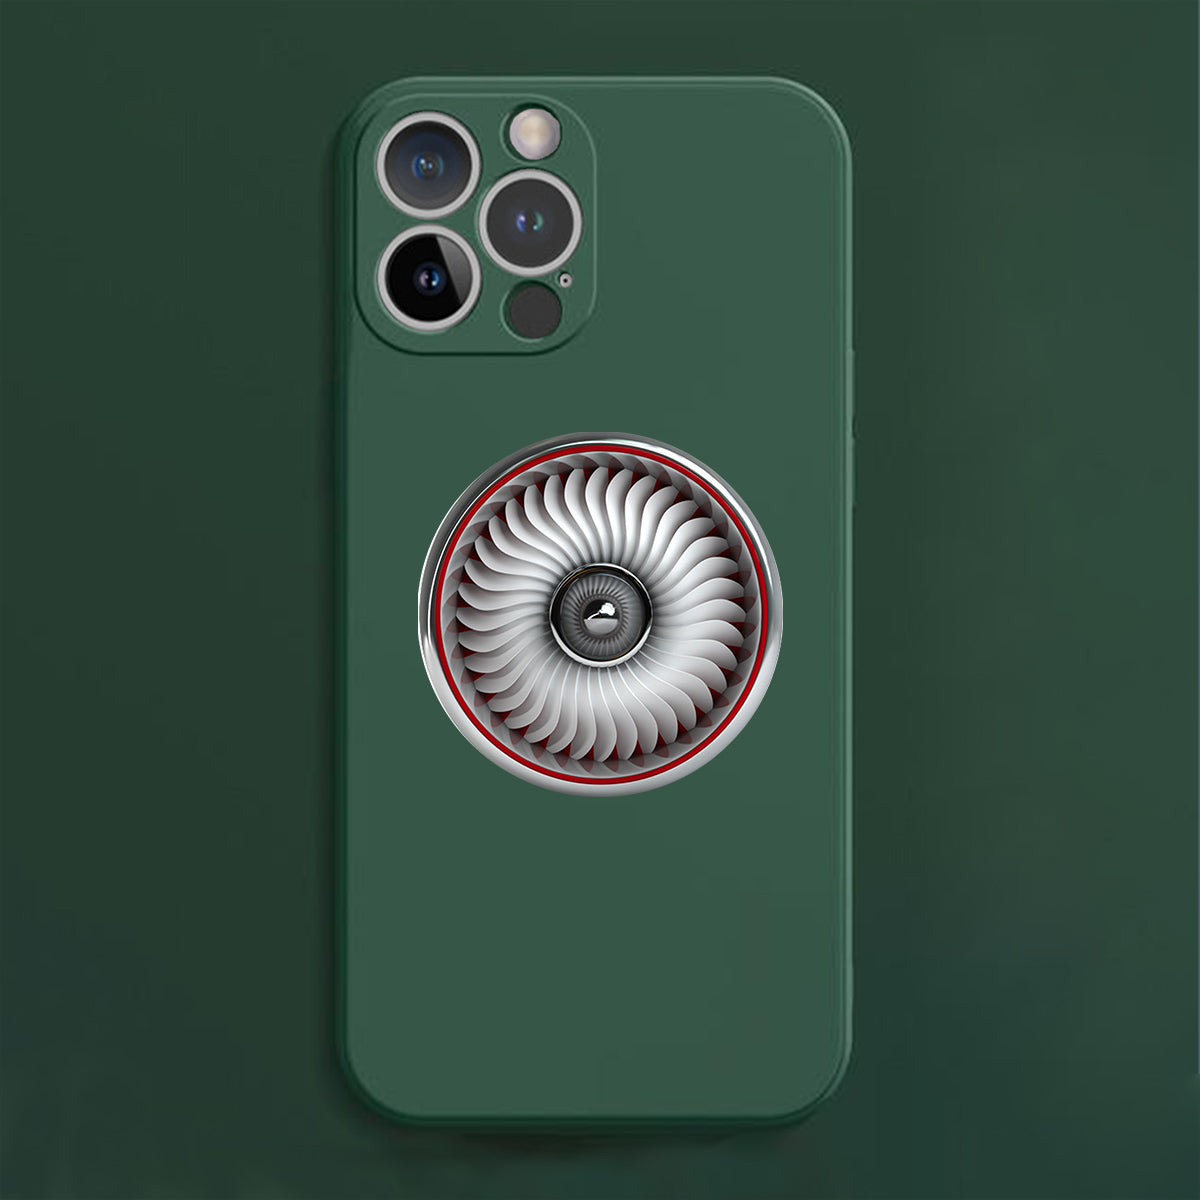 Graphical Jet Engine & Red Line Designed Soft Silicone iPhone Cases